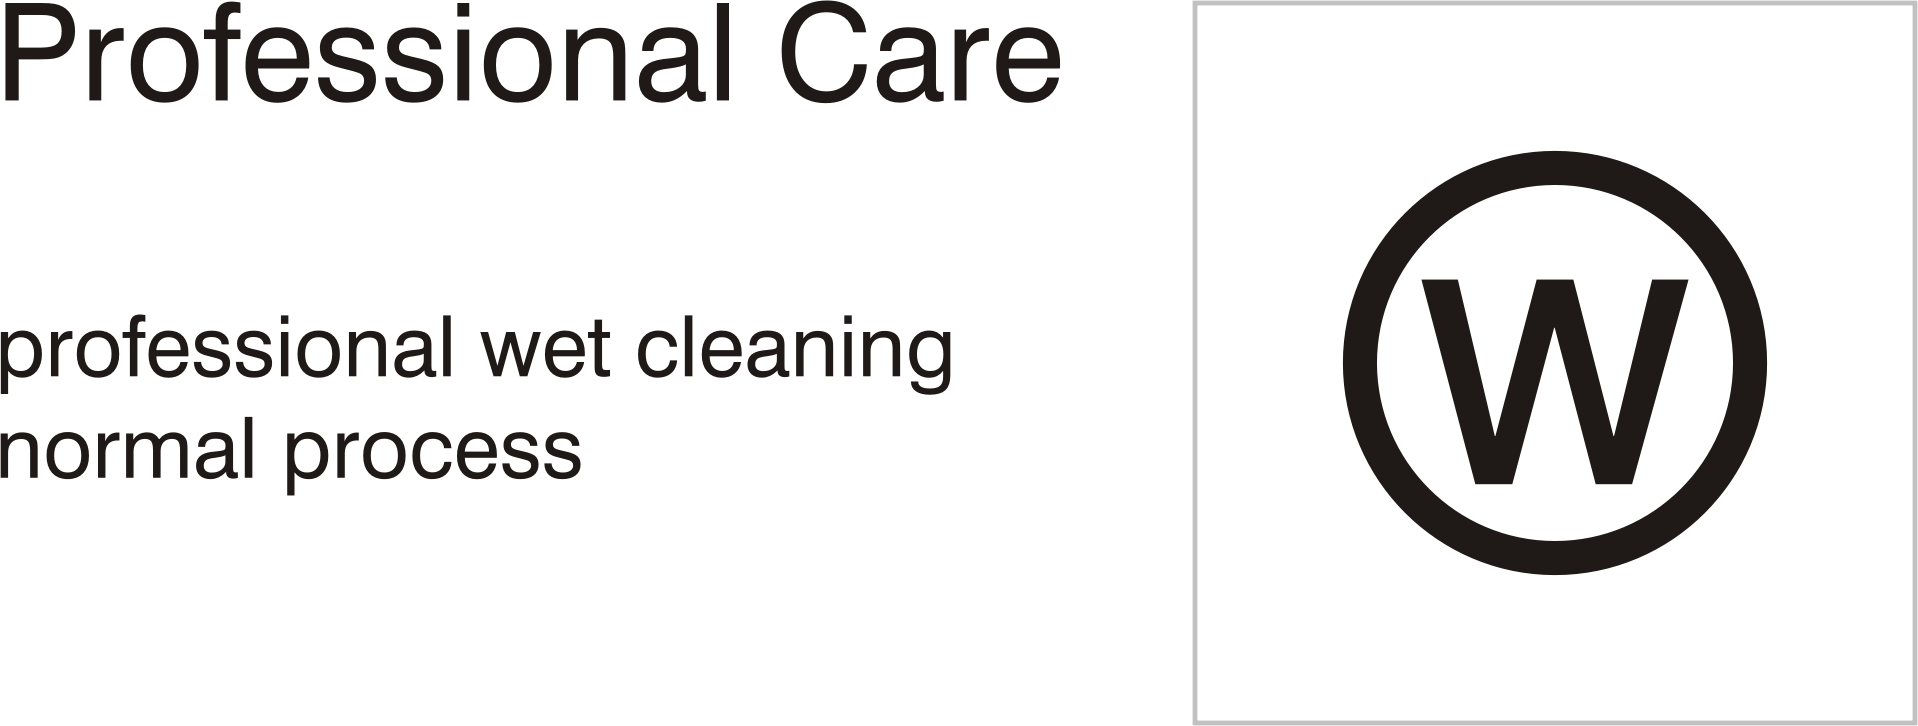 This Free Icons Png Design Of Care Symbols, Professional (1918x726), Png Download